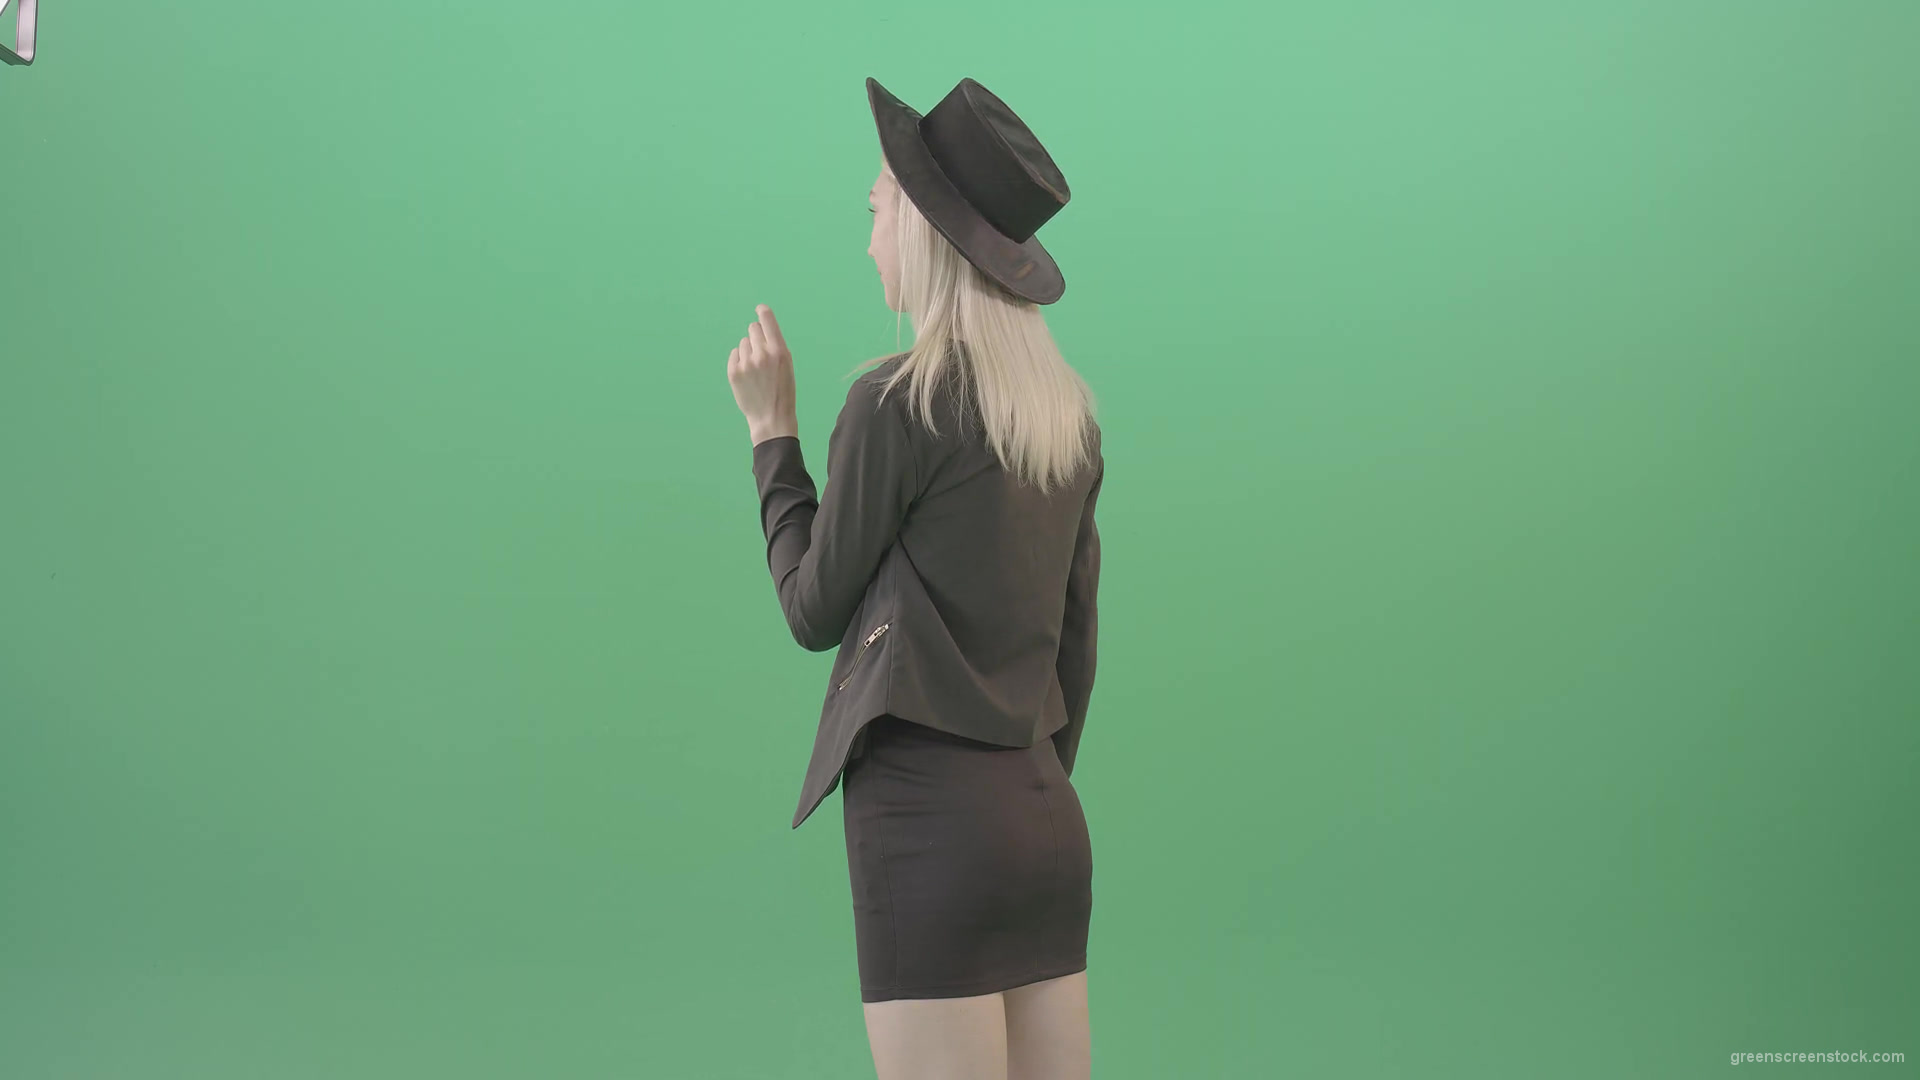 Back-view-black-costume-blonde-girl-looking-virtual-products-on-touch-screen-4K-Green-Screen-Video-Footage-1920_008 Green Screen Stock